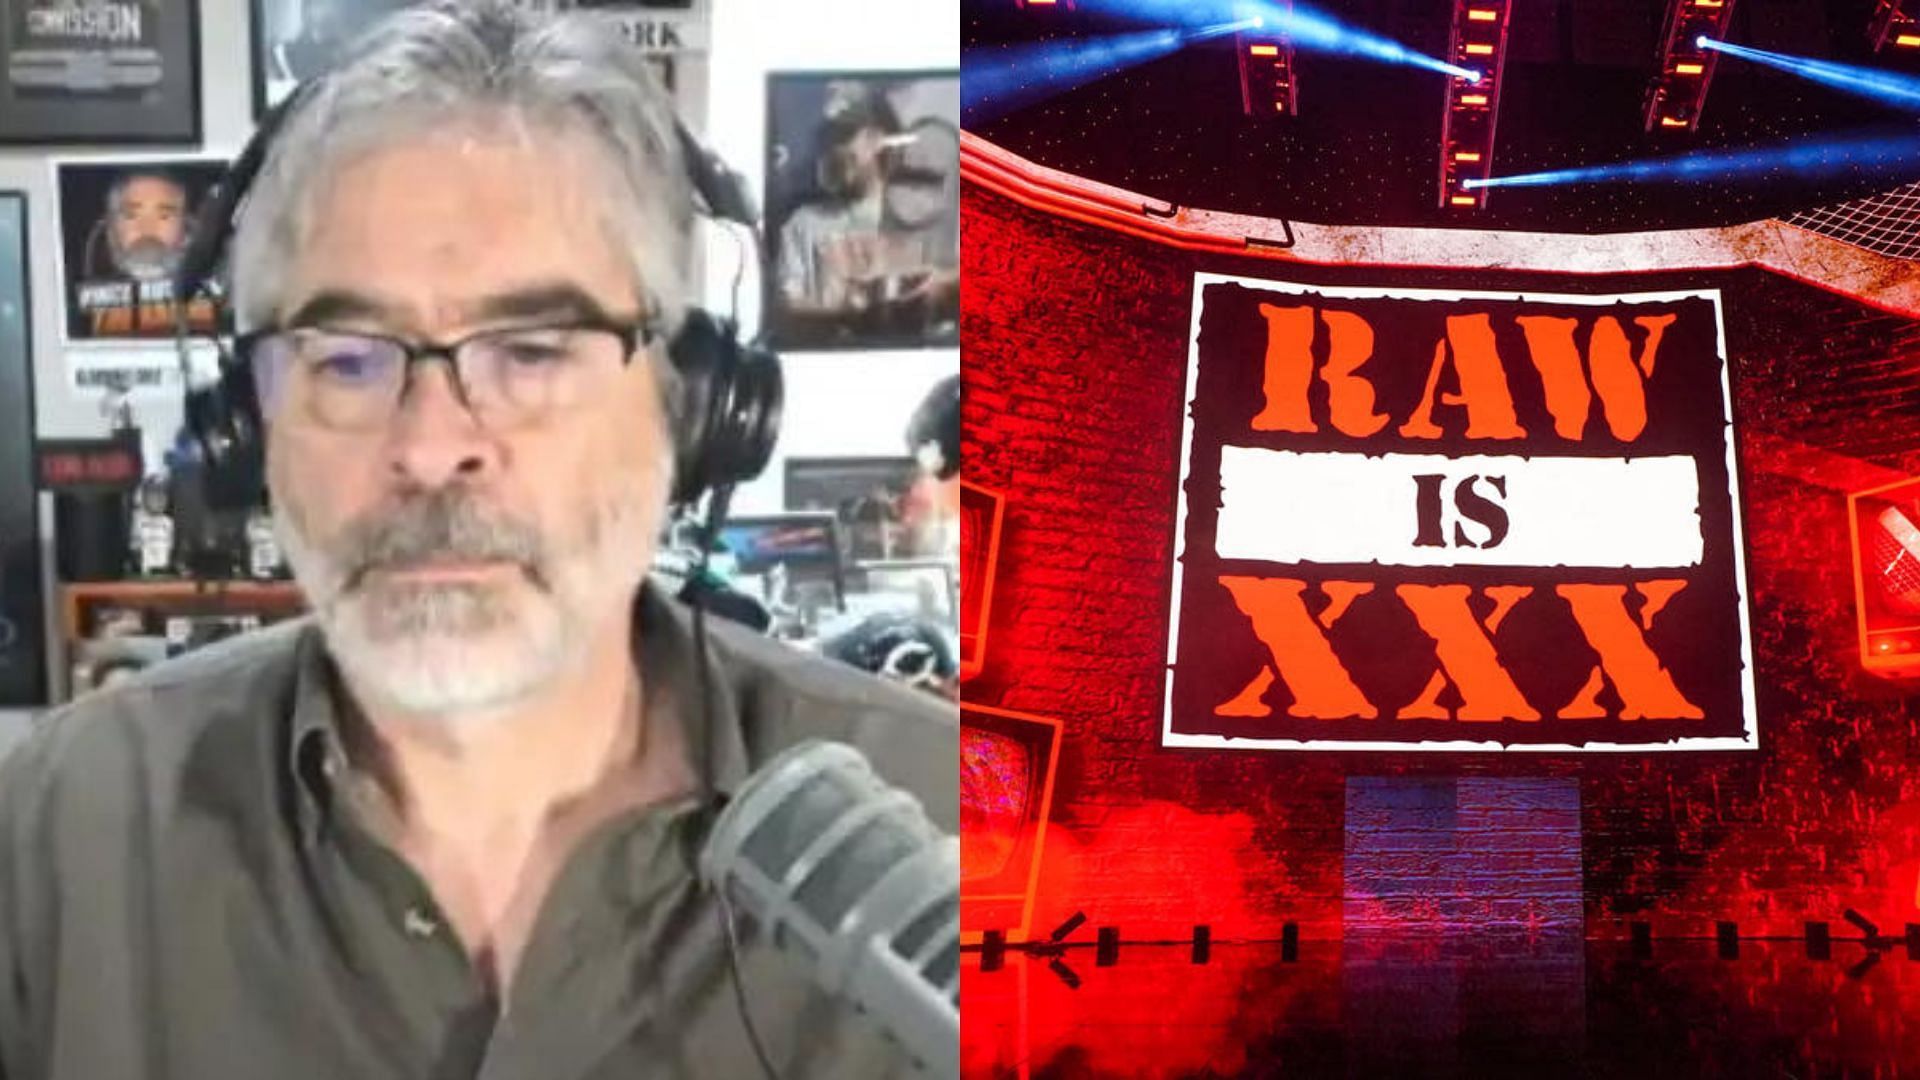 Vince Russo seemed to be a fan of RAW 30